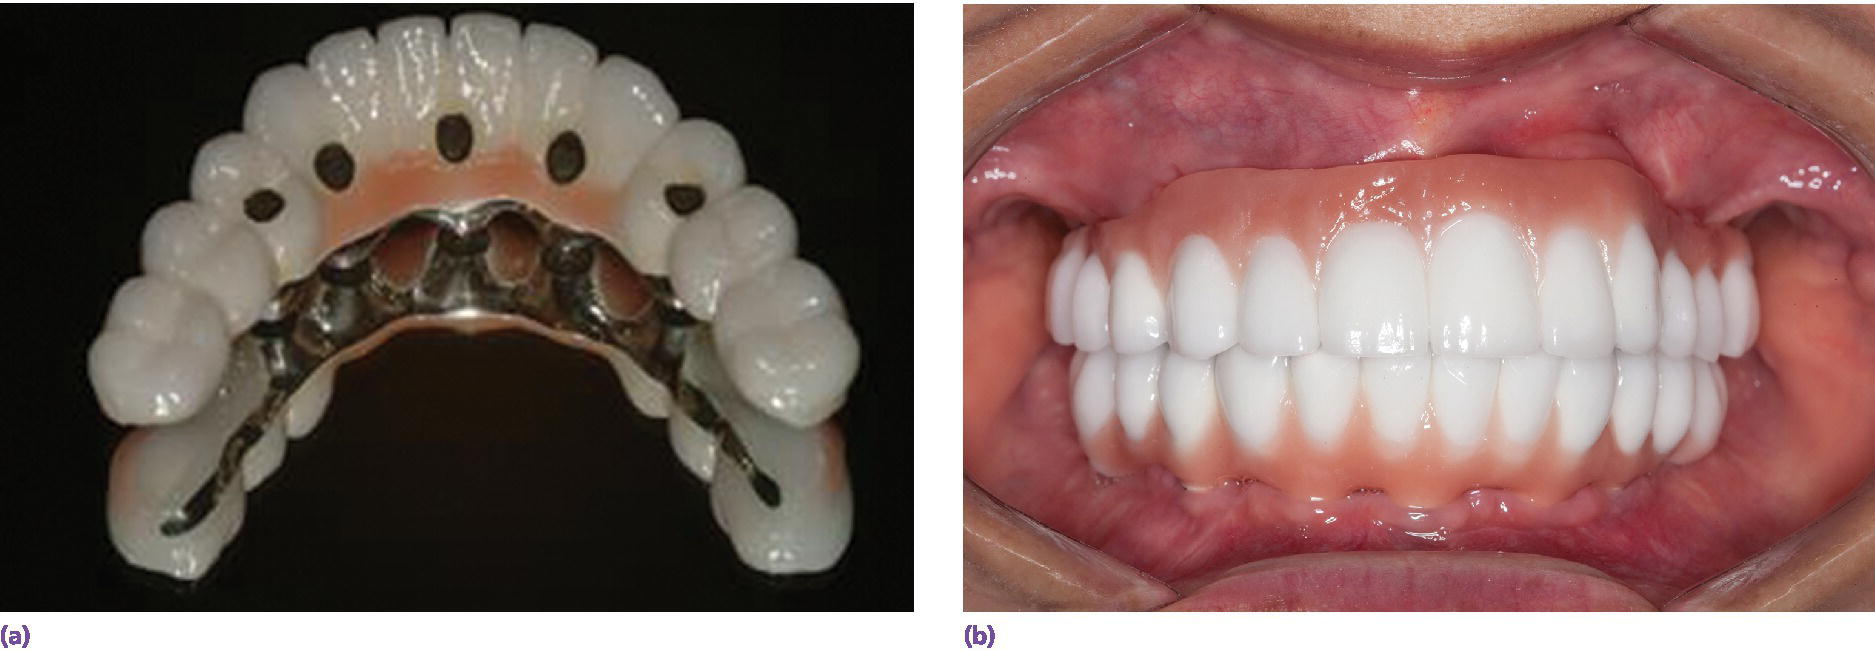 Photos of prosthesis construction with direct-to-fixture connection to secure cantilever design as sole osseous anchorage in interforaminal mandible opposing a maxillary fixed dental prosthesis(left,right).